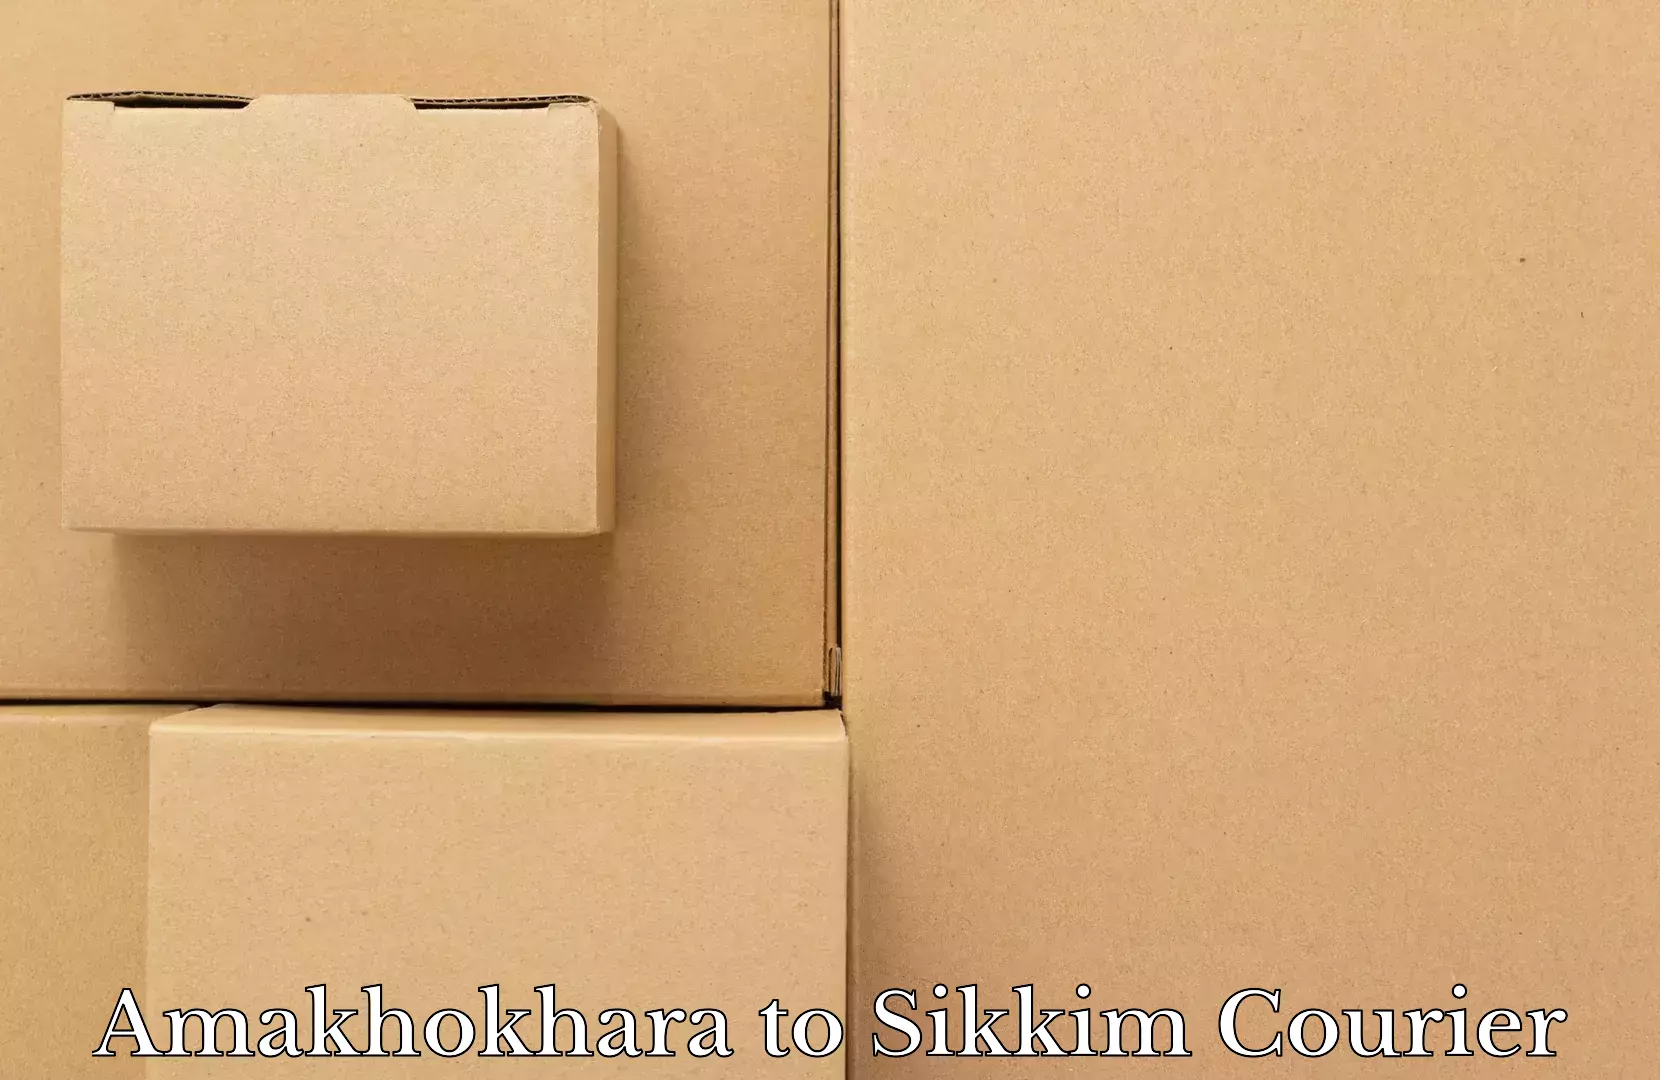 Personal effects shipping in Amakhokhara to Sikkim